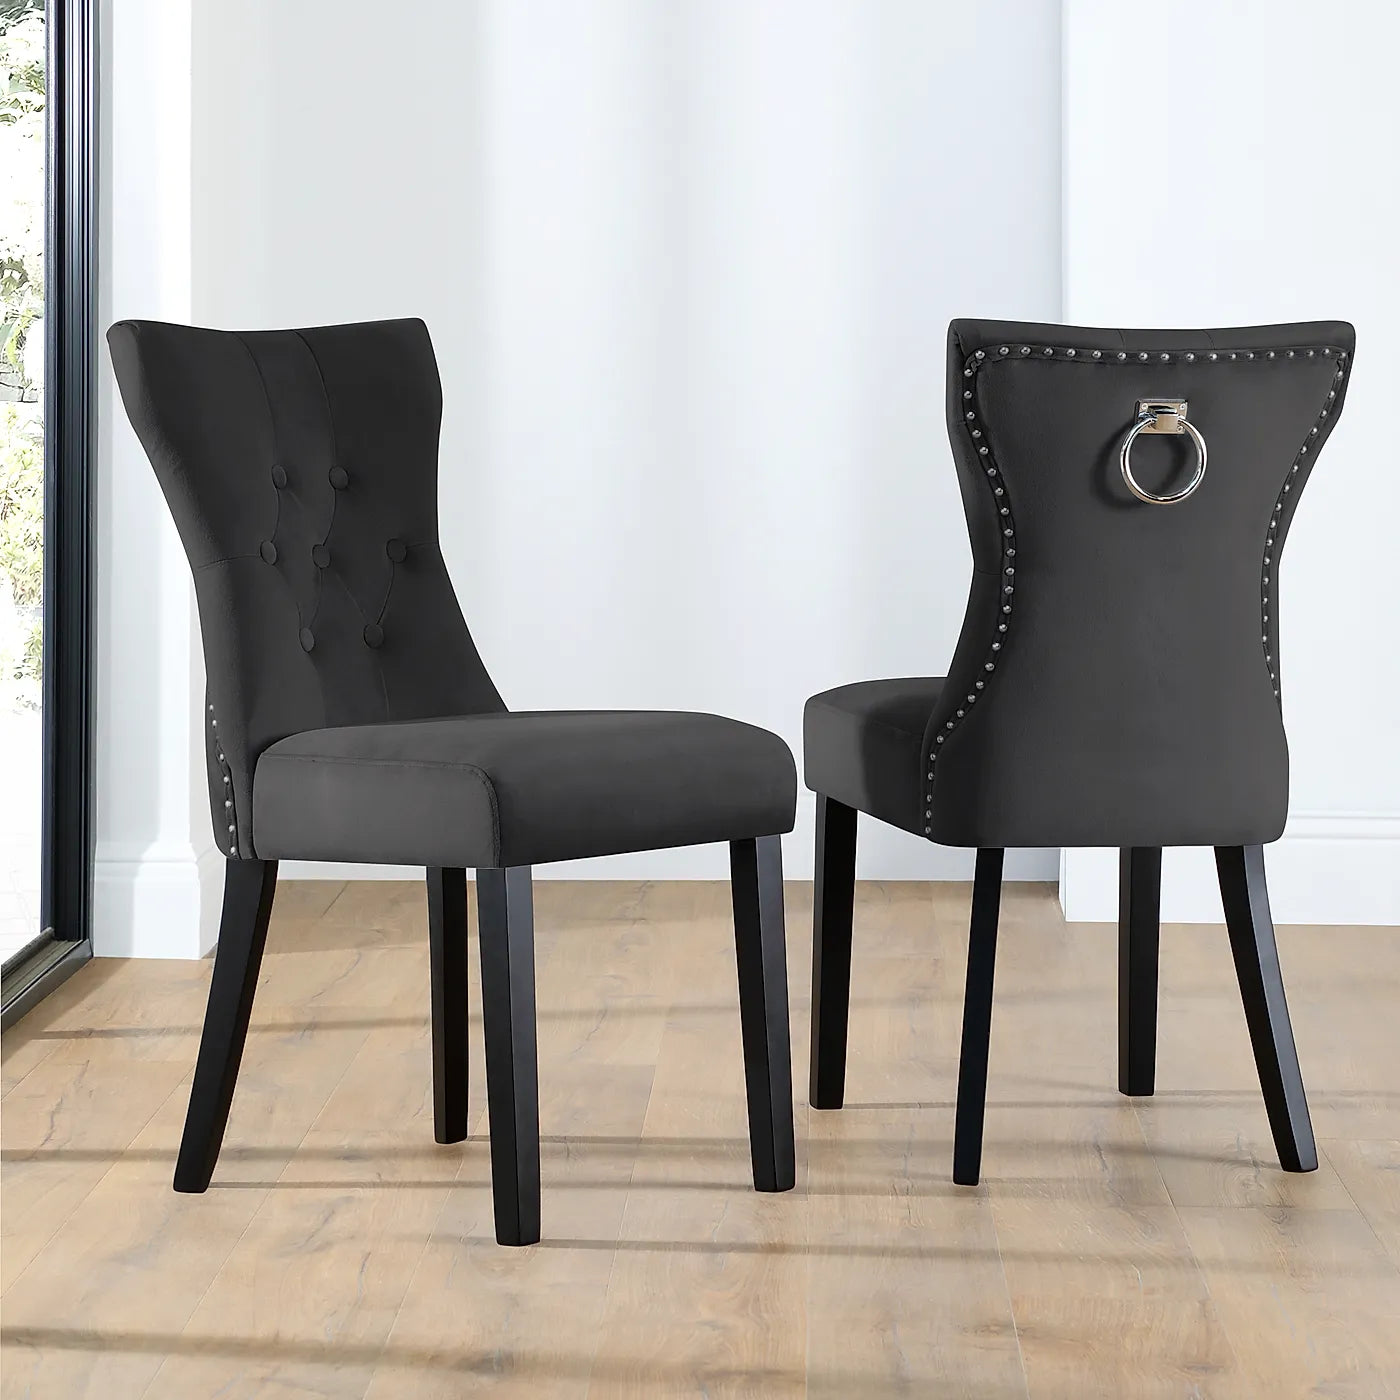 Kellington Buttoned Dining Chair - Set of 2